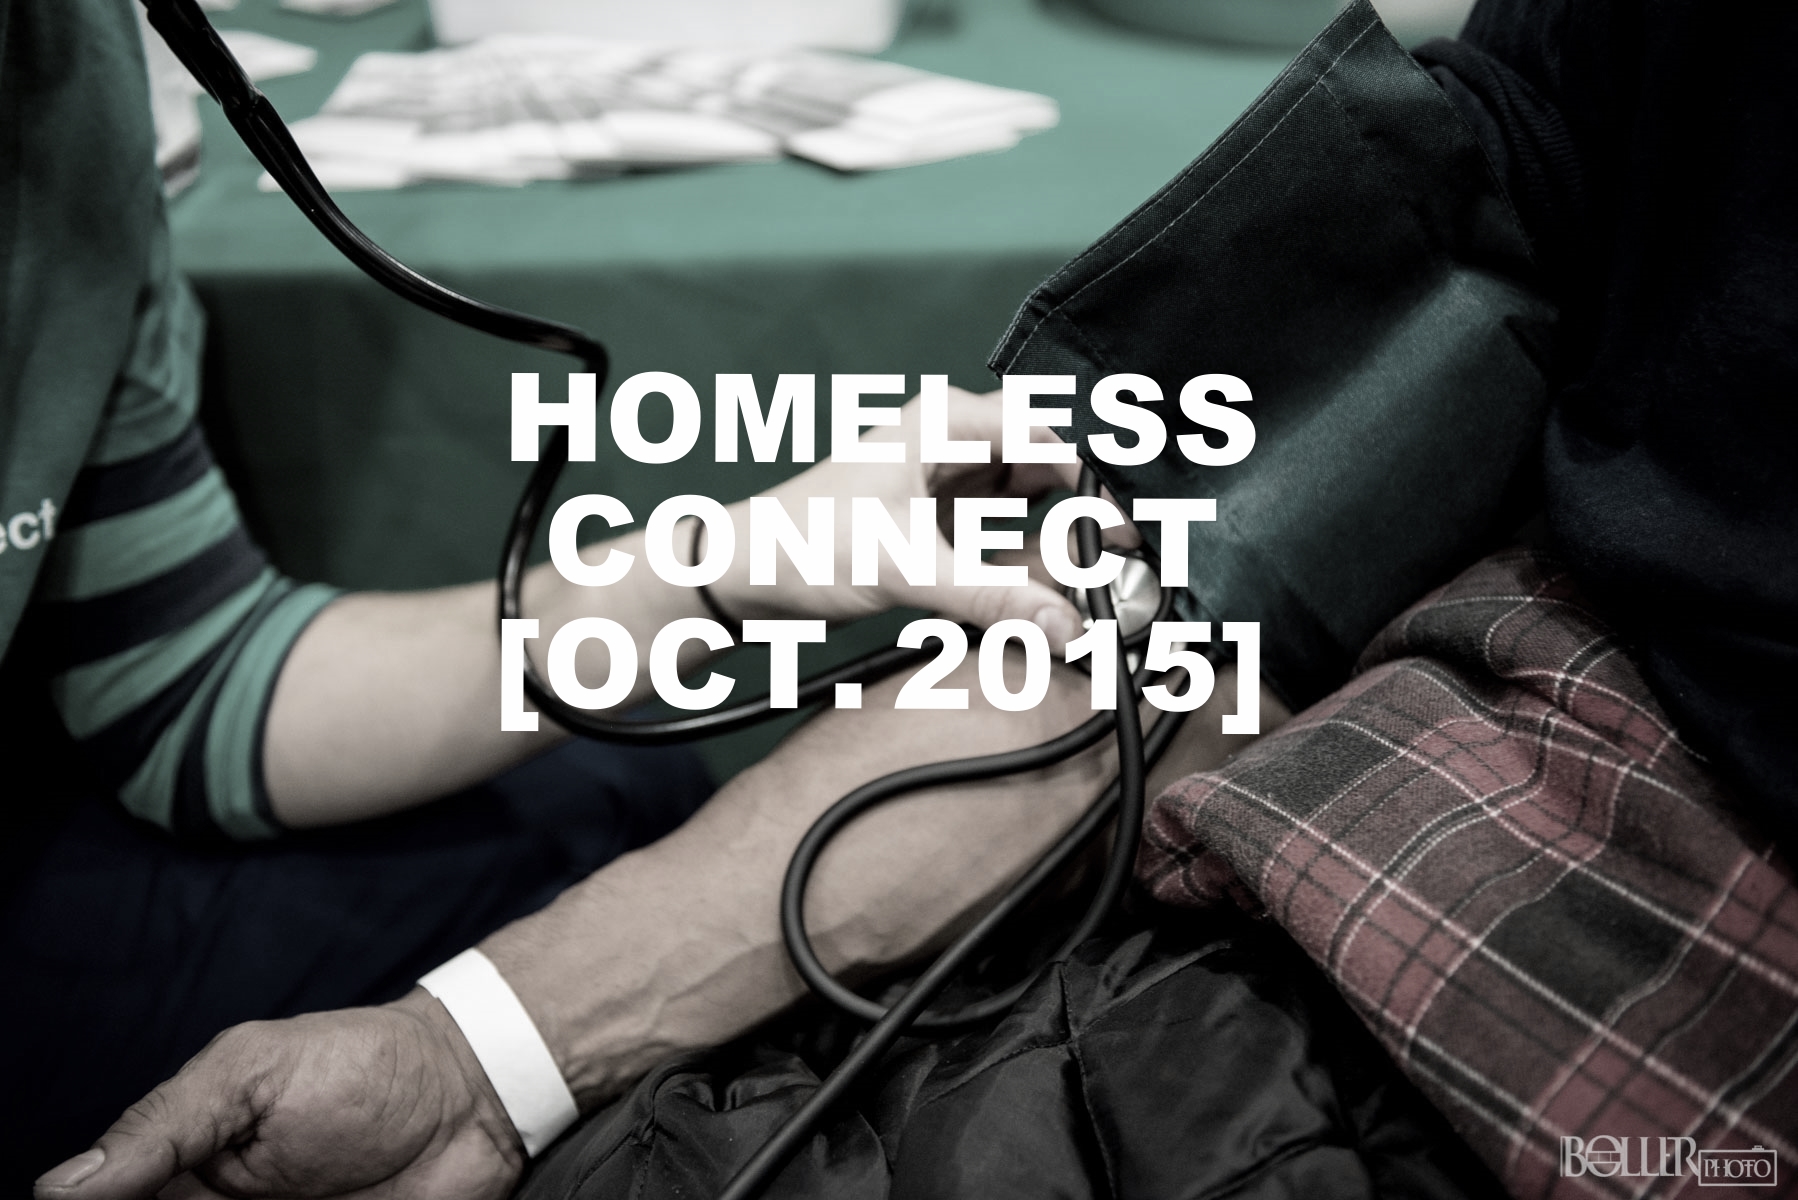 Homeless Connect    [Oct. 2015]